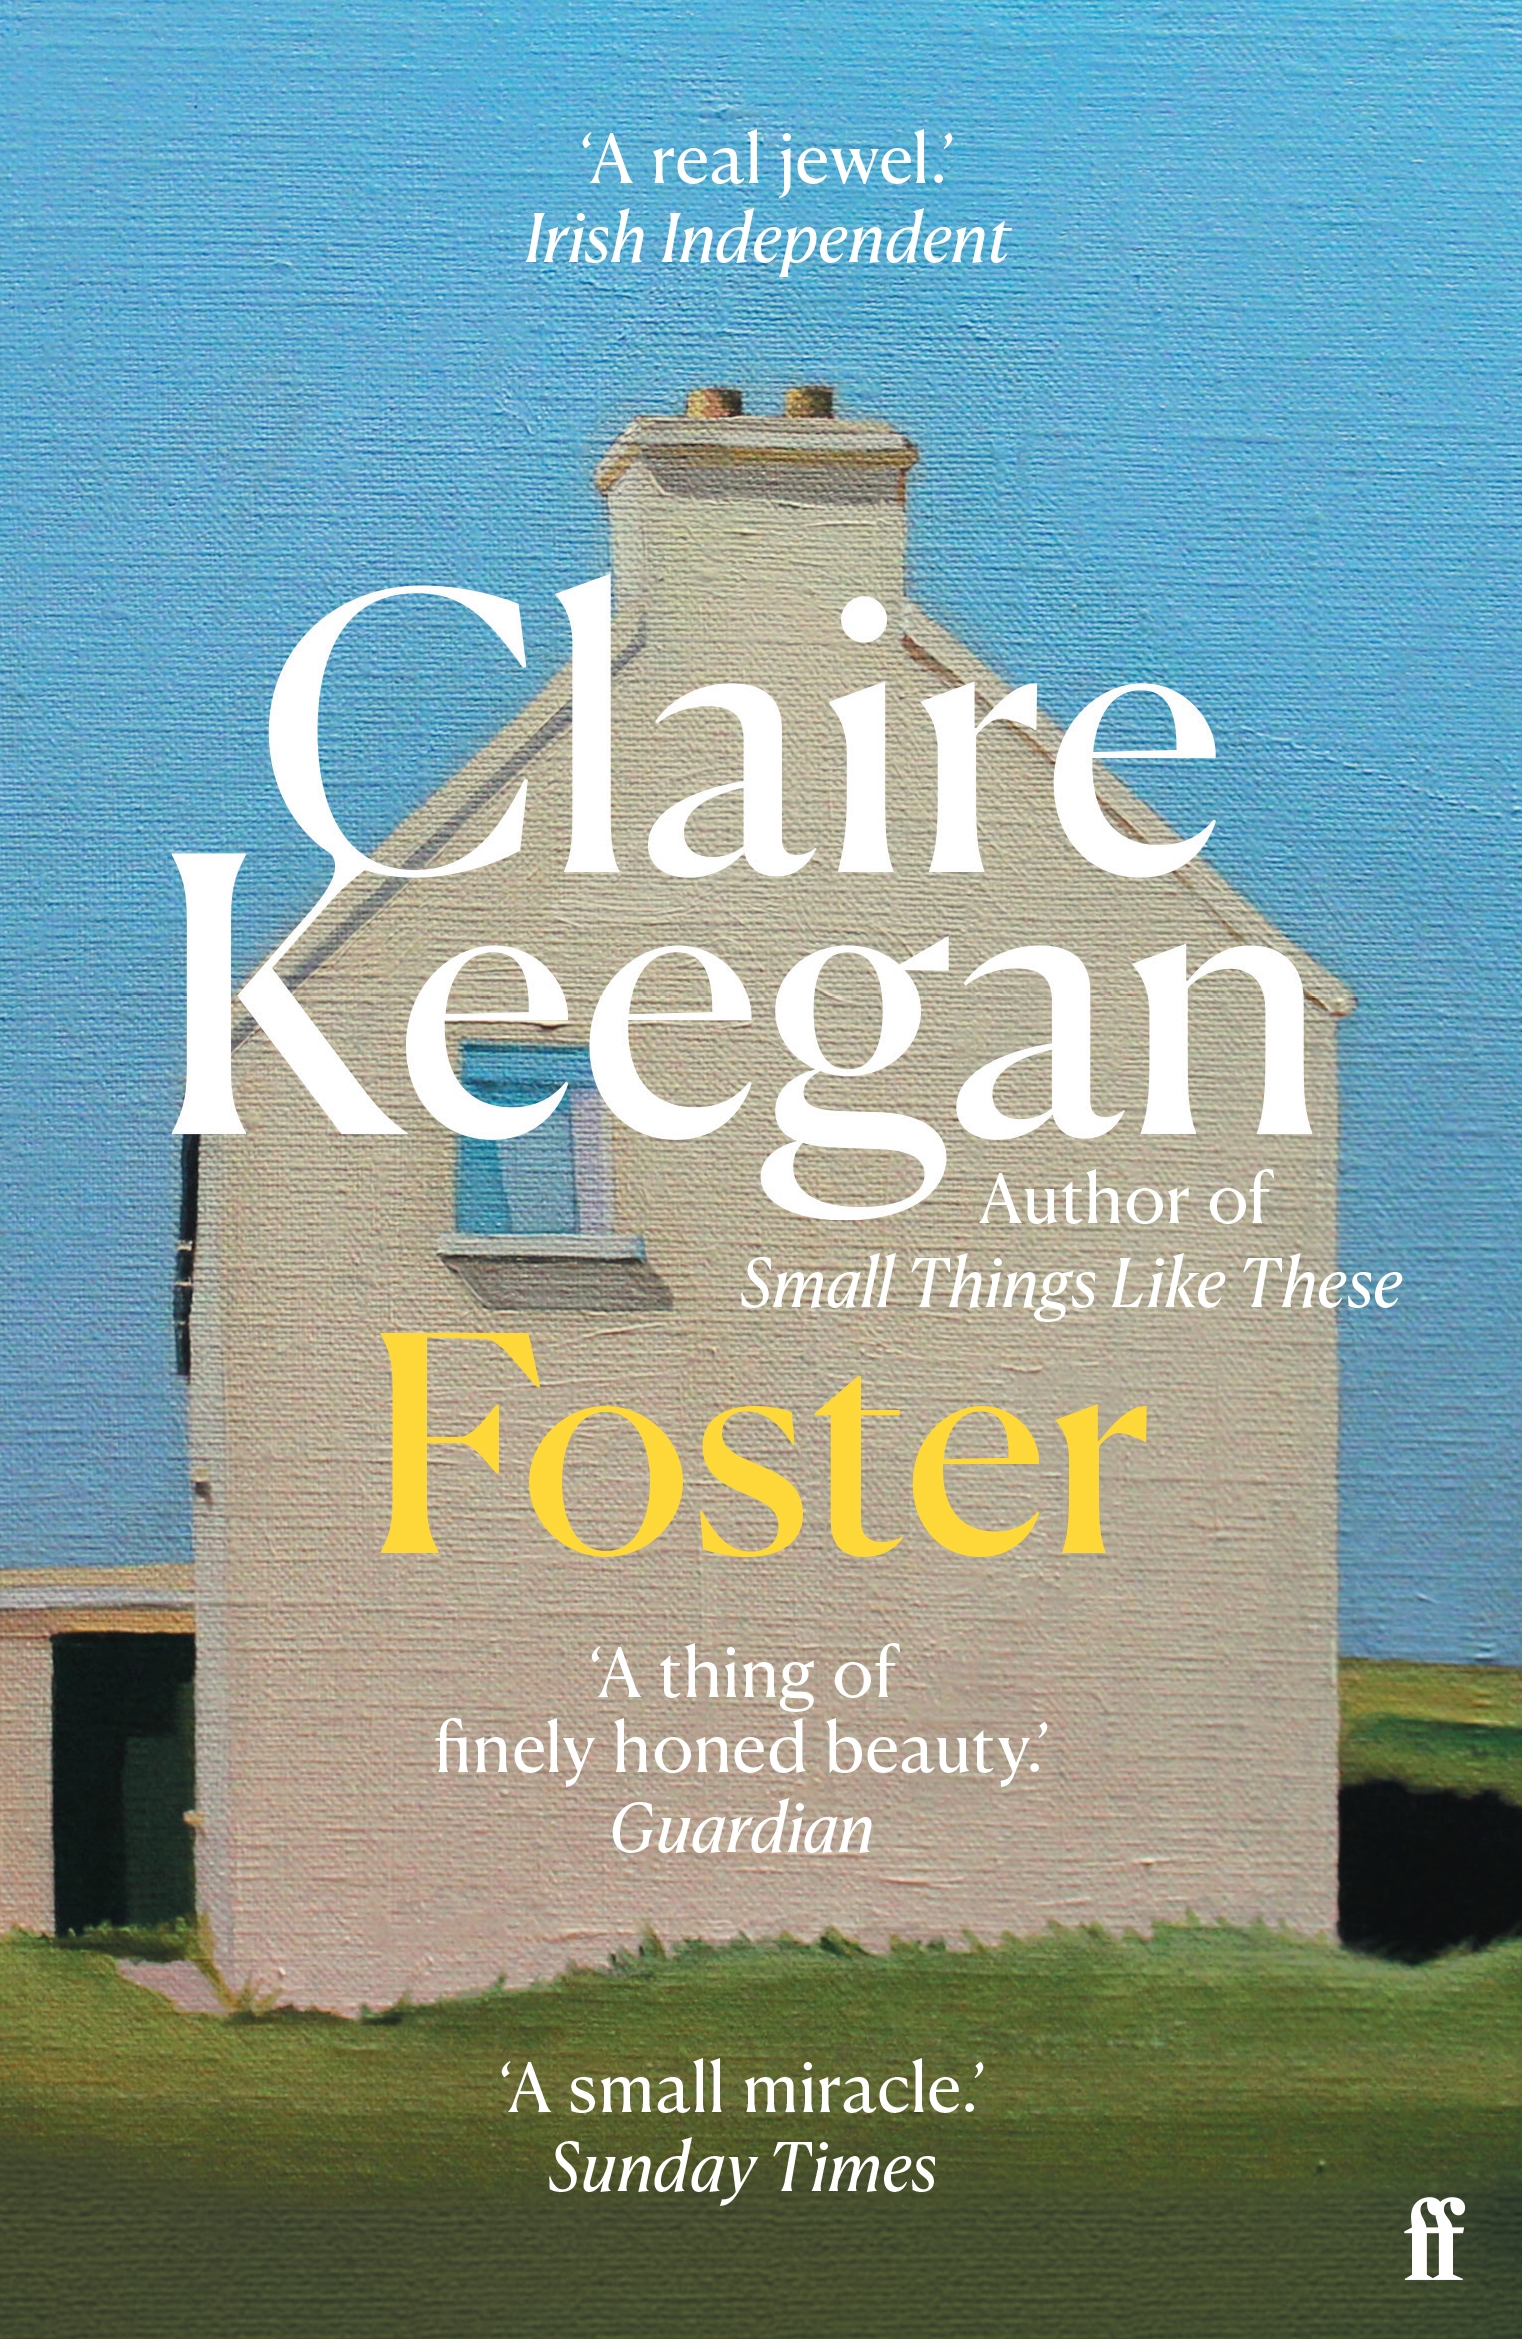 Claire Keegan: Foster (2010, Faber and Faber)